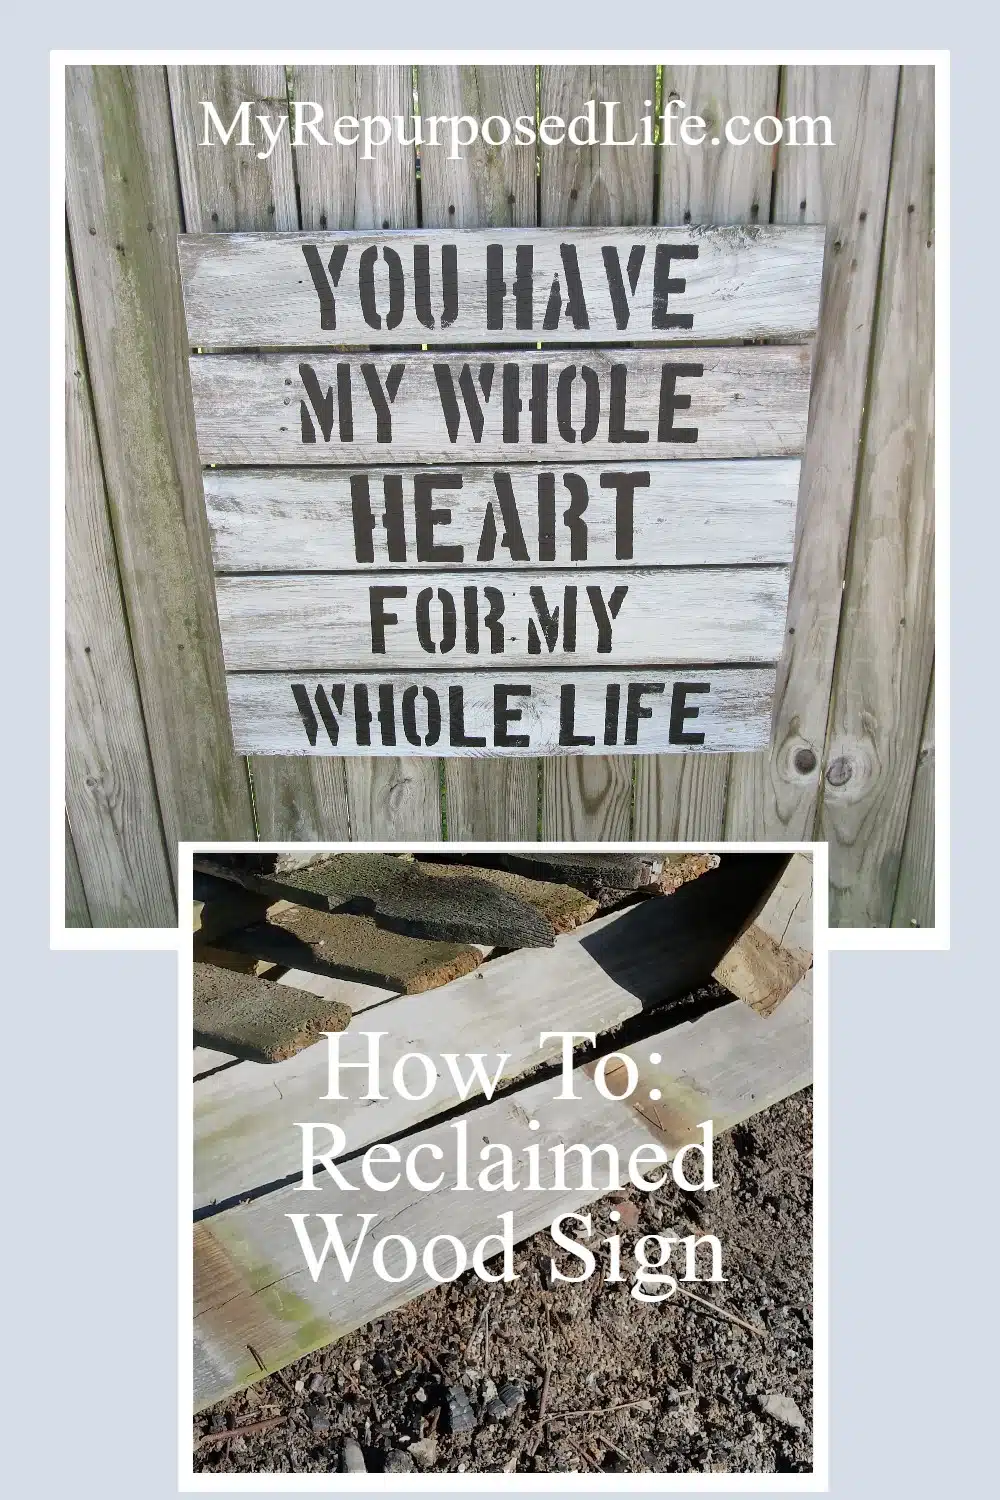 Learn how to make a unique and rustic reclaimed wooden sign with these easy steps! Follow this step by step guide and create a one-of-a-kind sign for your home. #MyRepurposedLife #MyWholeHeart #diy #sign via @repurposedlife